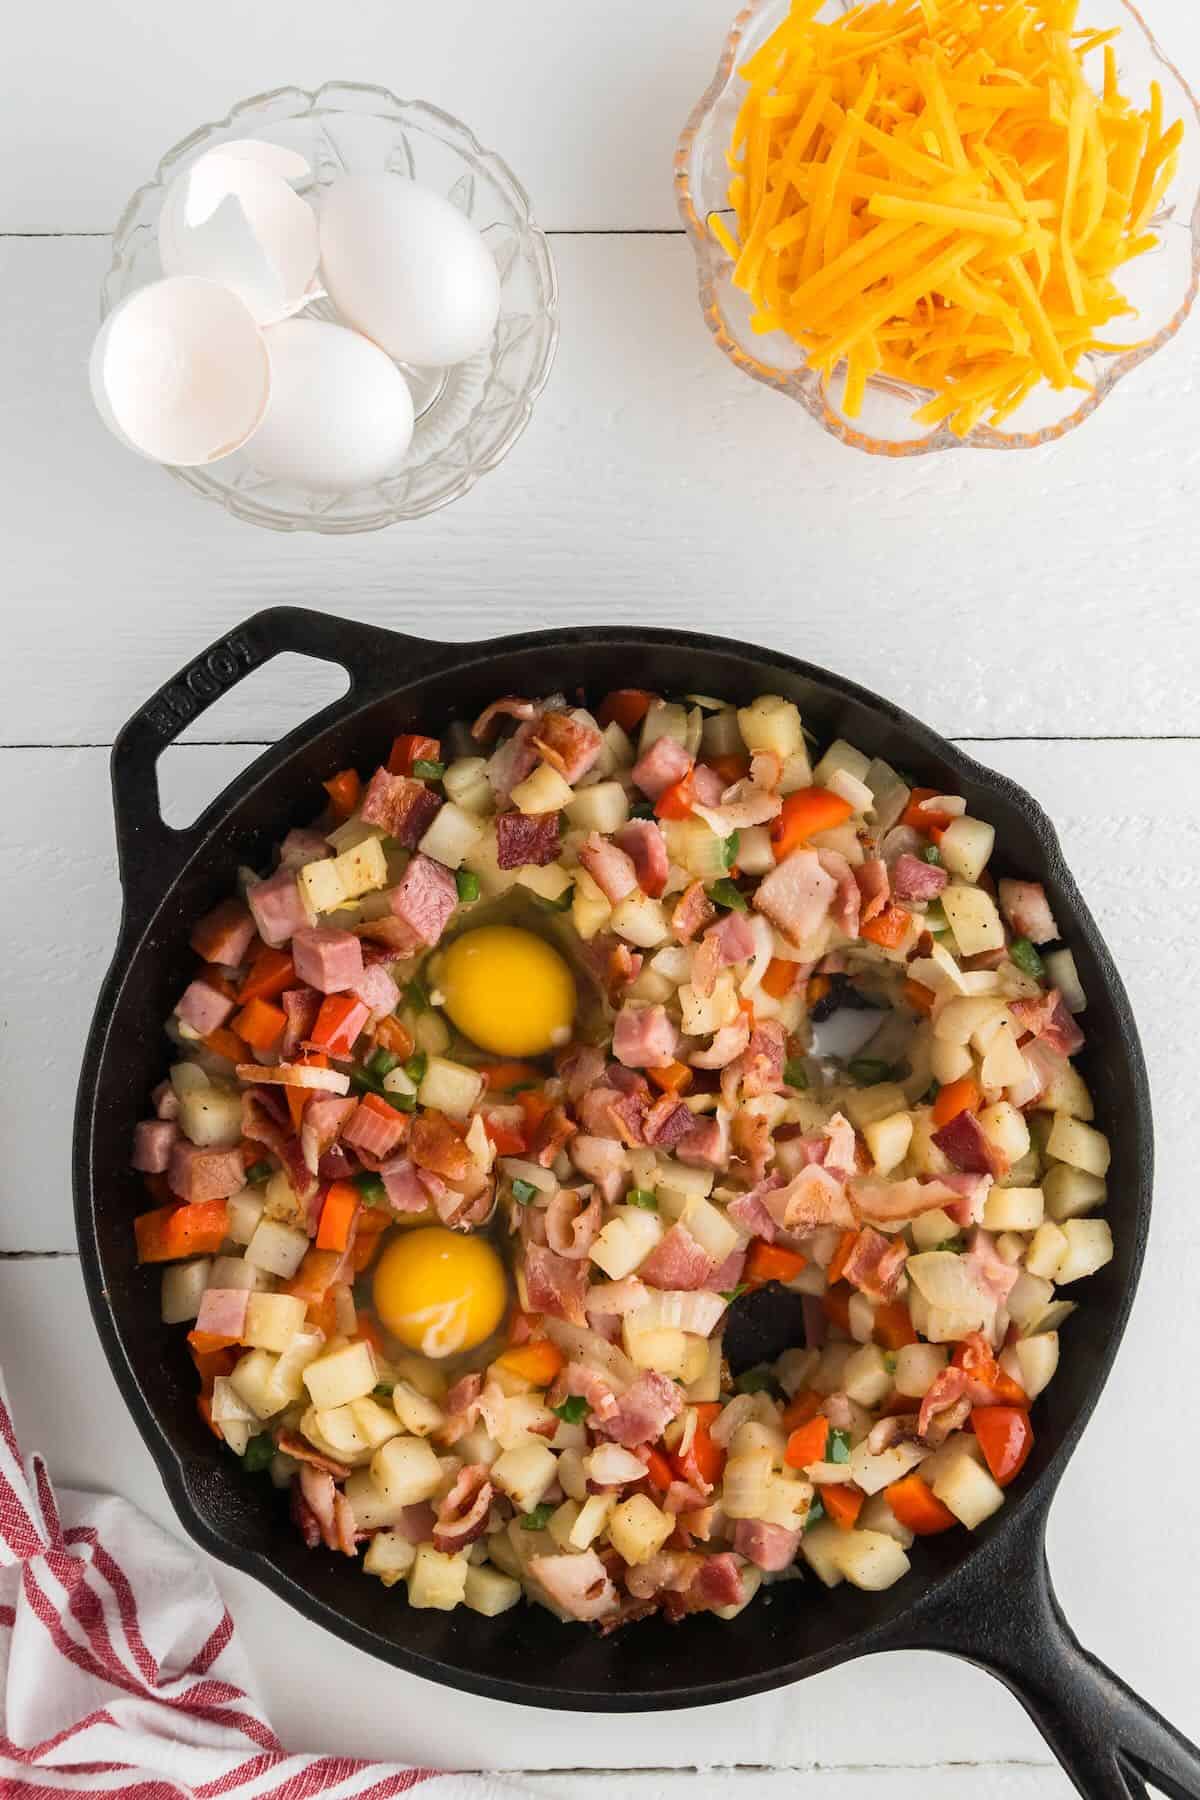 Breakfast skillet with wells created in the vegetables to add eggs. 